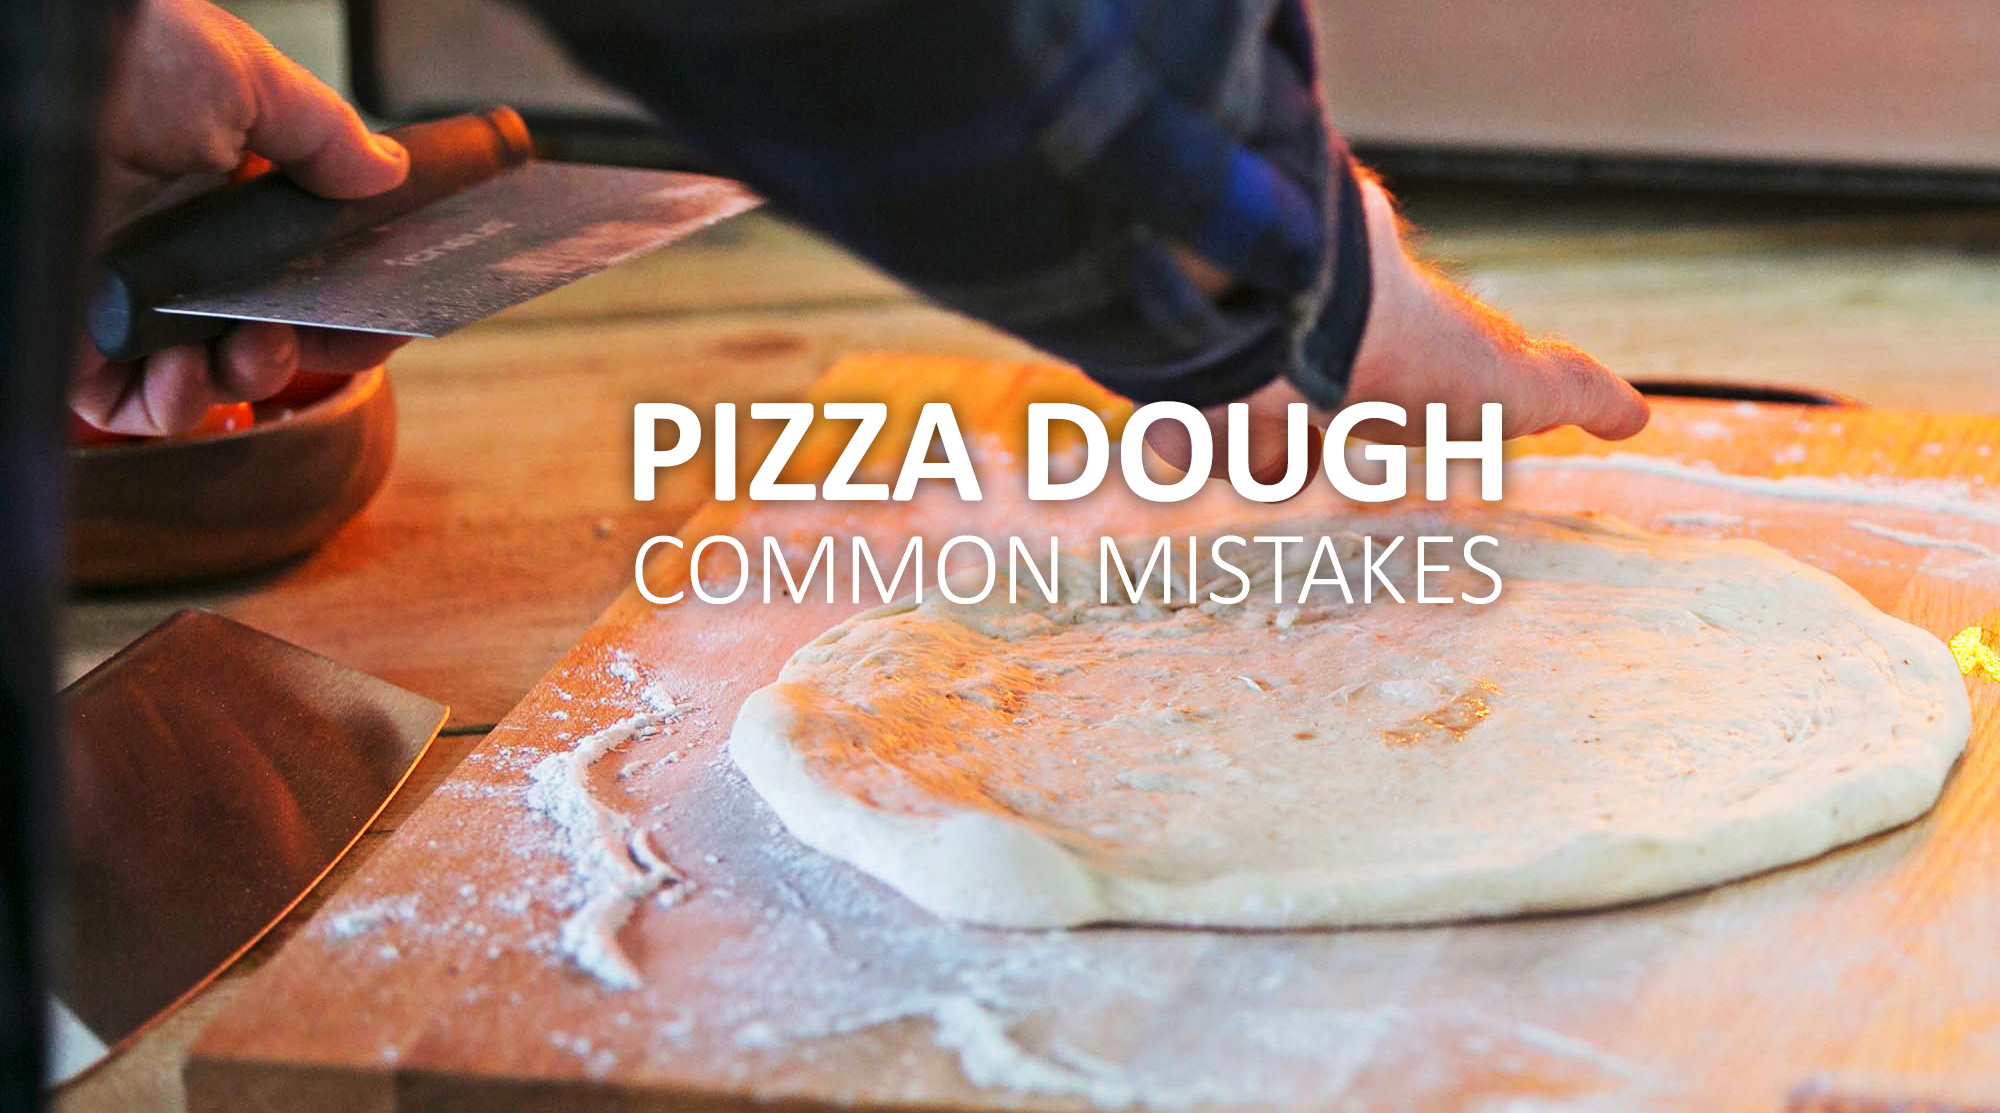 5 Common Mistakes When Making Pizza Dough - Igneus wood fired pizza ovens uk